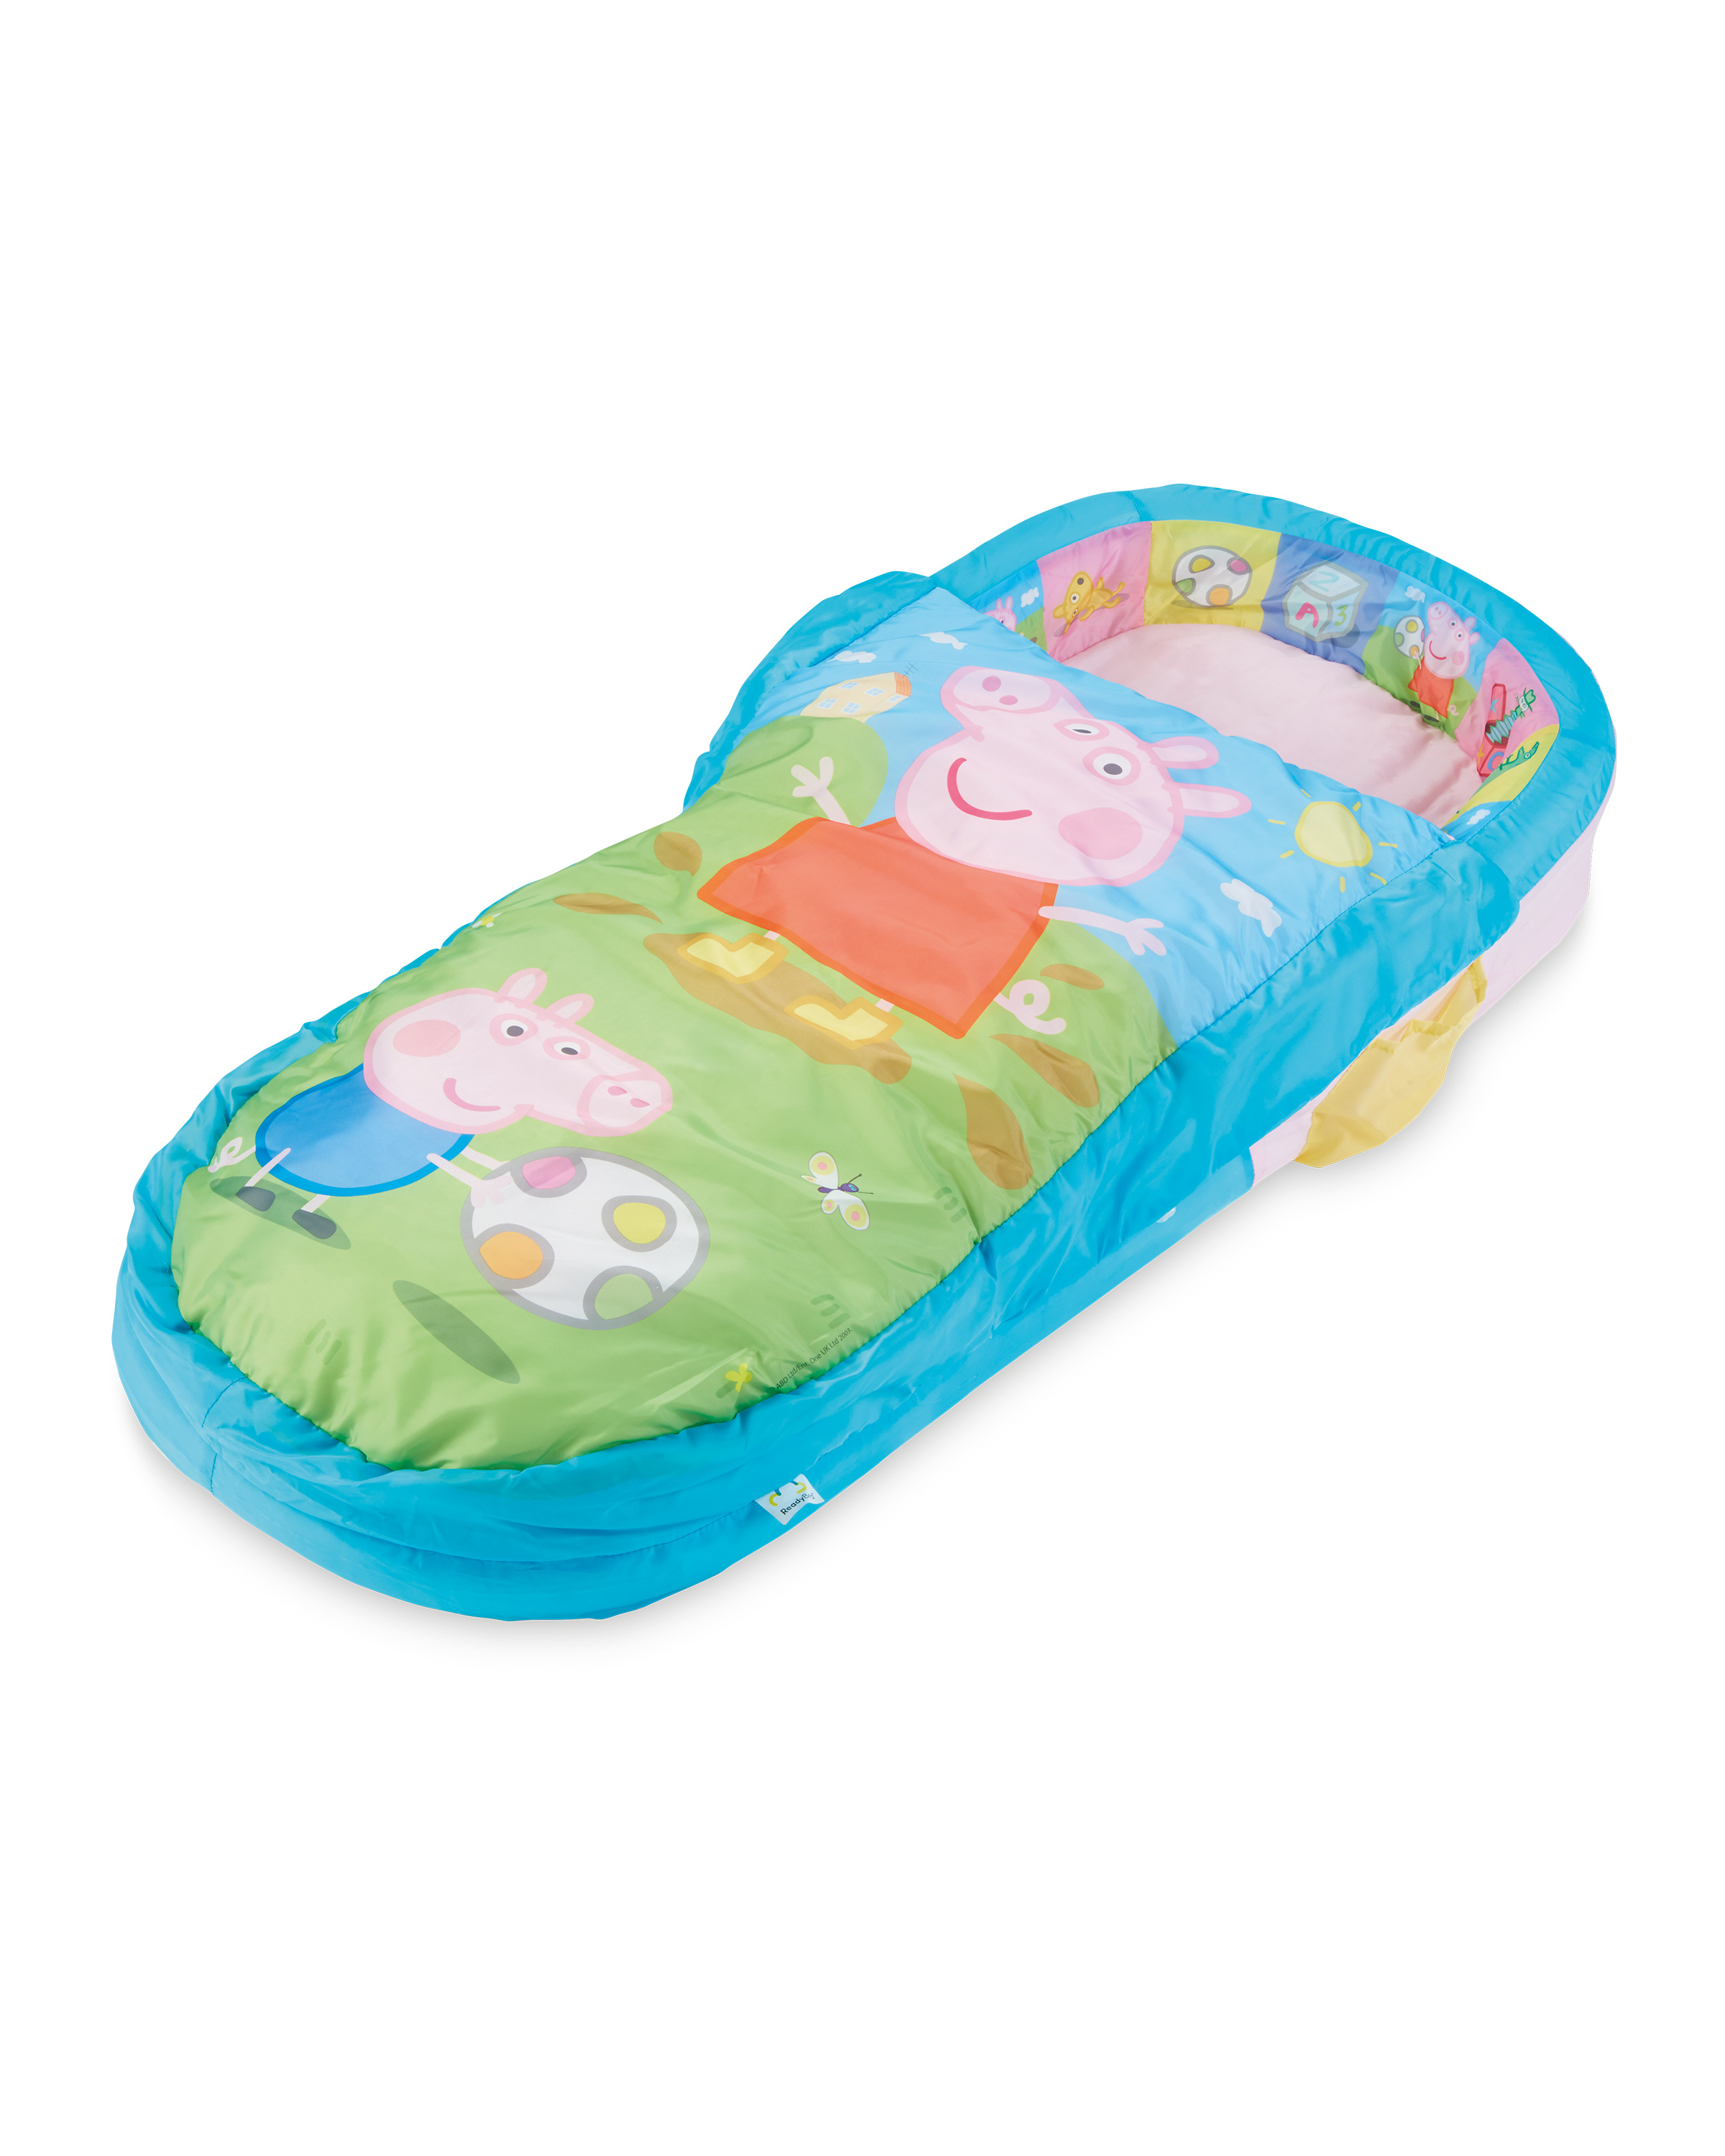 Peppa Pig - My first ReadyBed - children's sleeping bag and air bed in one  - Germany, New - The wholesale platform